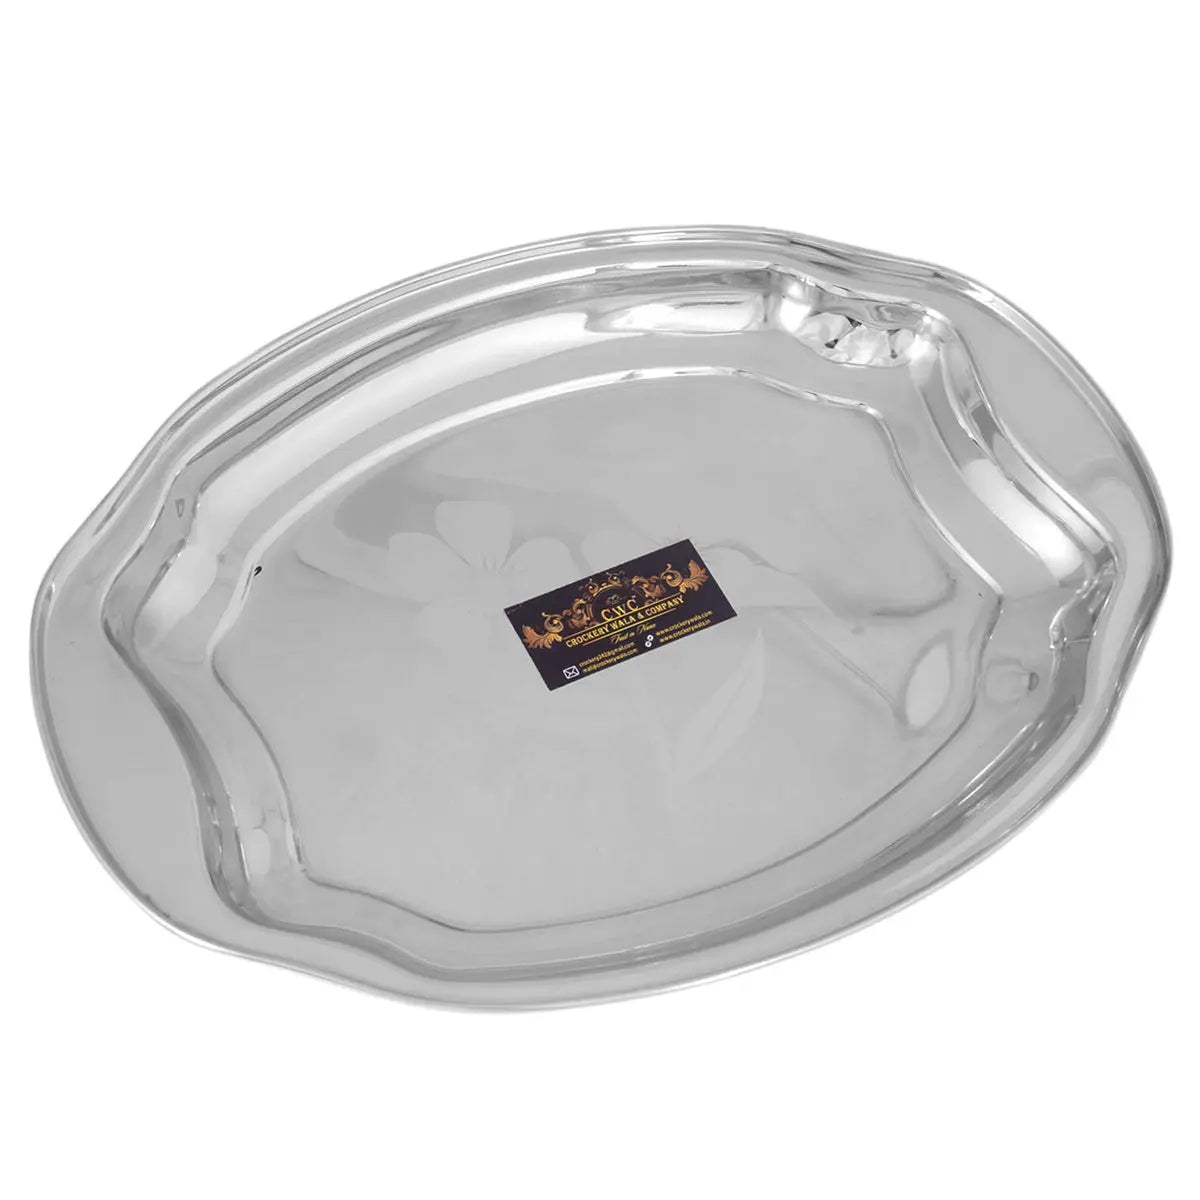 Crockery Wala And Company Stainless Steel Serving Tray Salad Rice Dish Serving Tray Dinnerware | 1 Pc - CROCKERY WALA AND COMPANY 